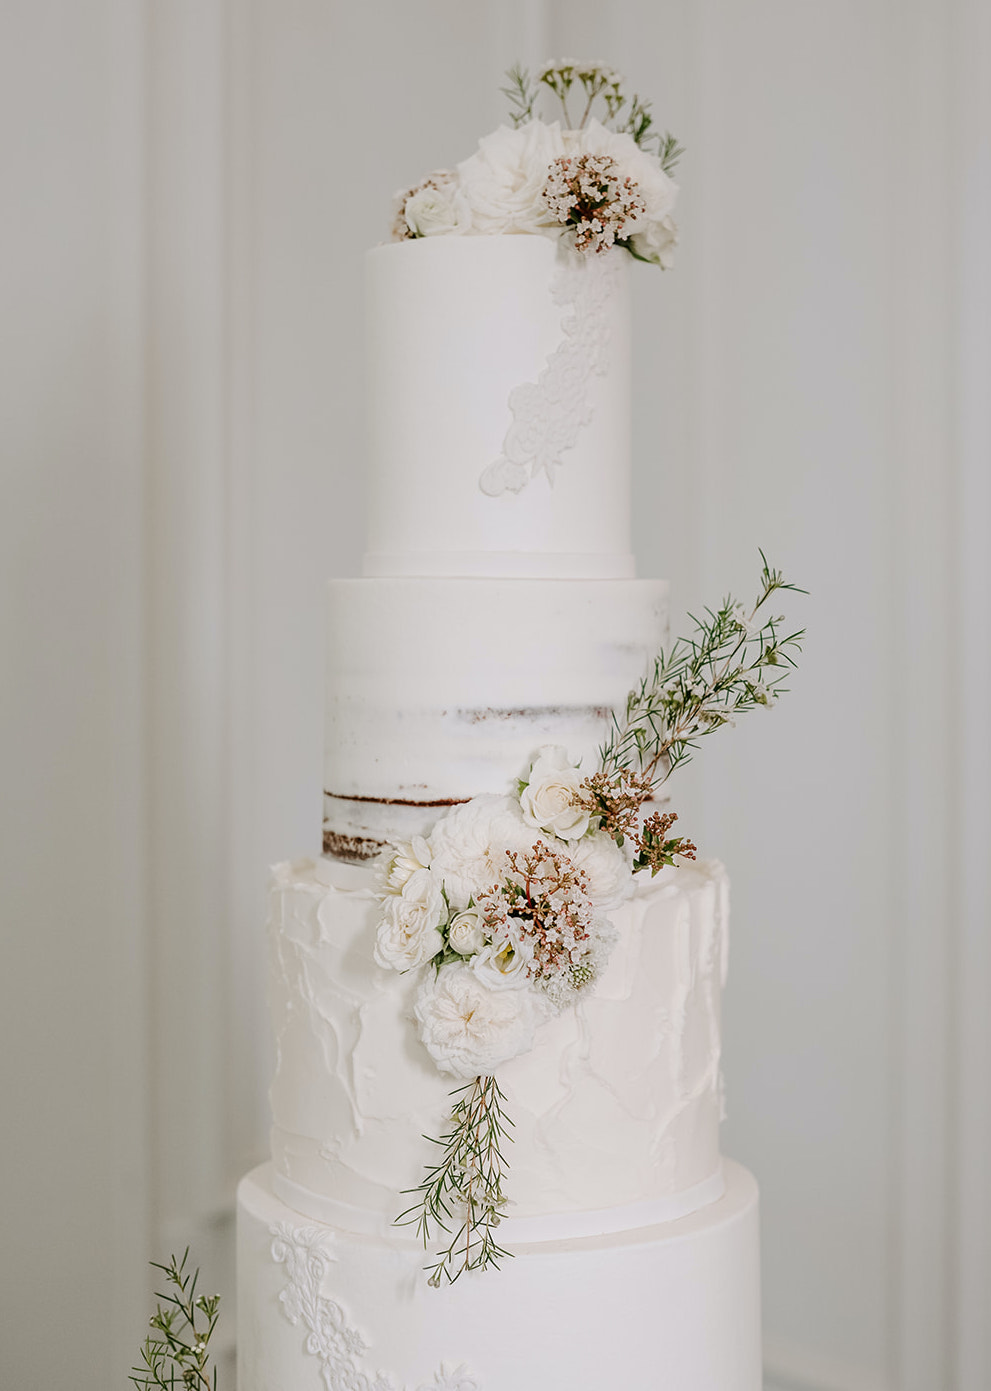 The wedding cake has ivory textured frosting and dainty whimsical flowers along each tier at a wedding reception at The Peach Orchard Venue. 